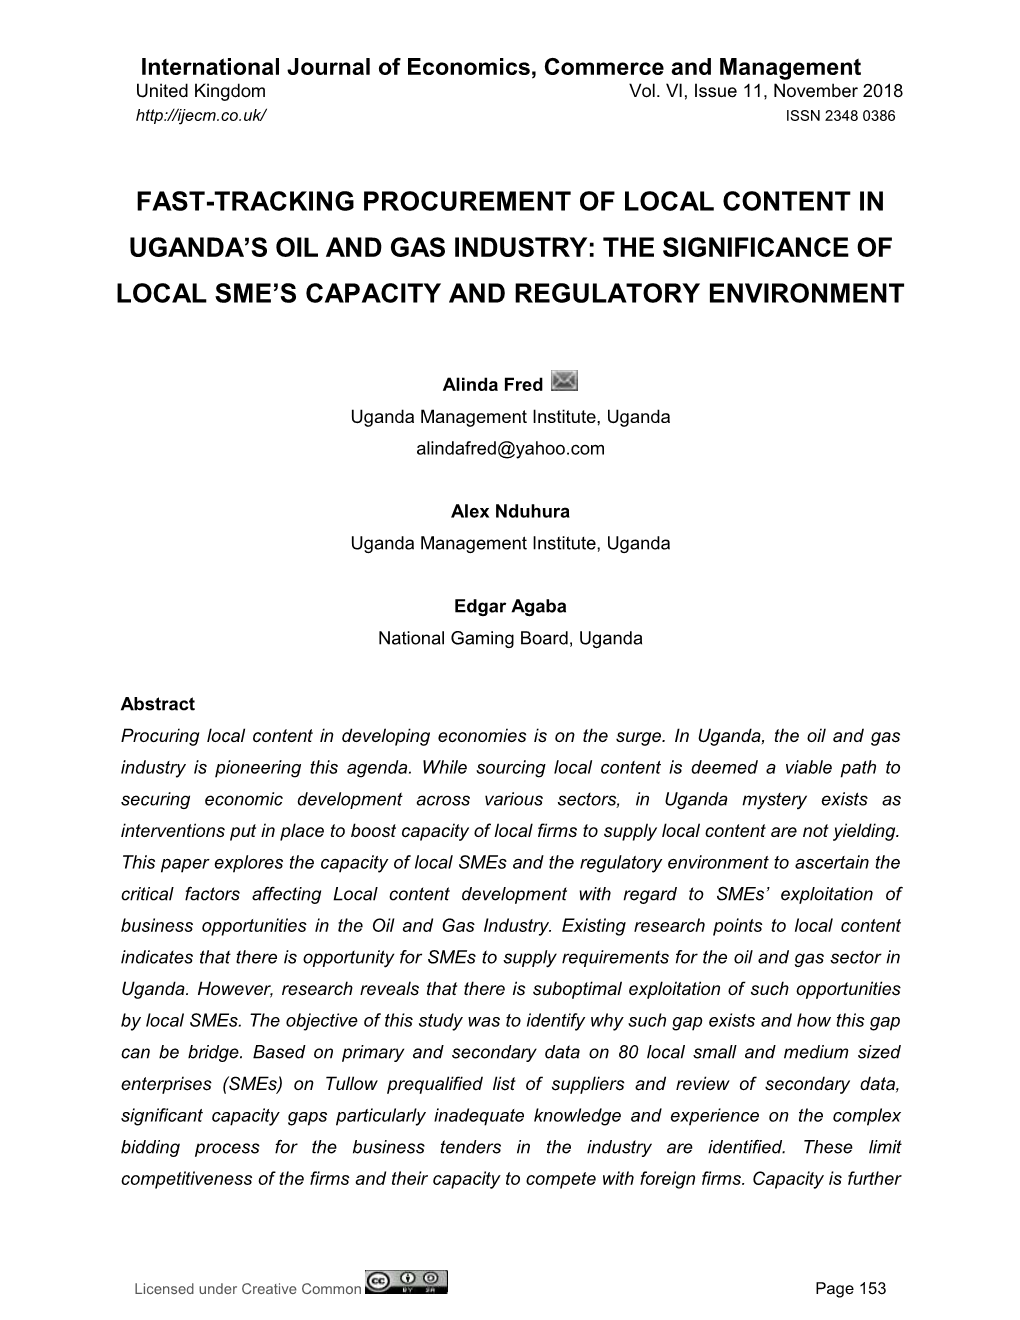 Fast-Tracking Procurement of Local Content in Uganda's Oil and Gas Industry